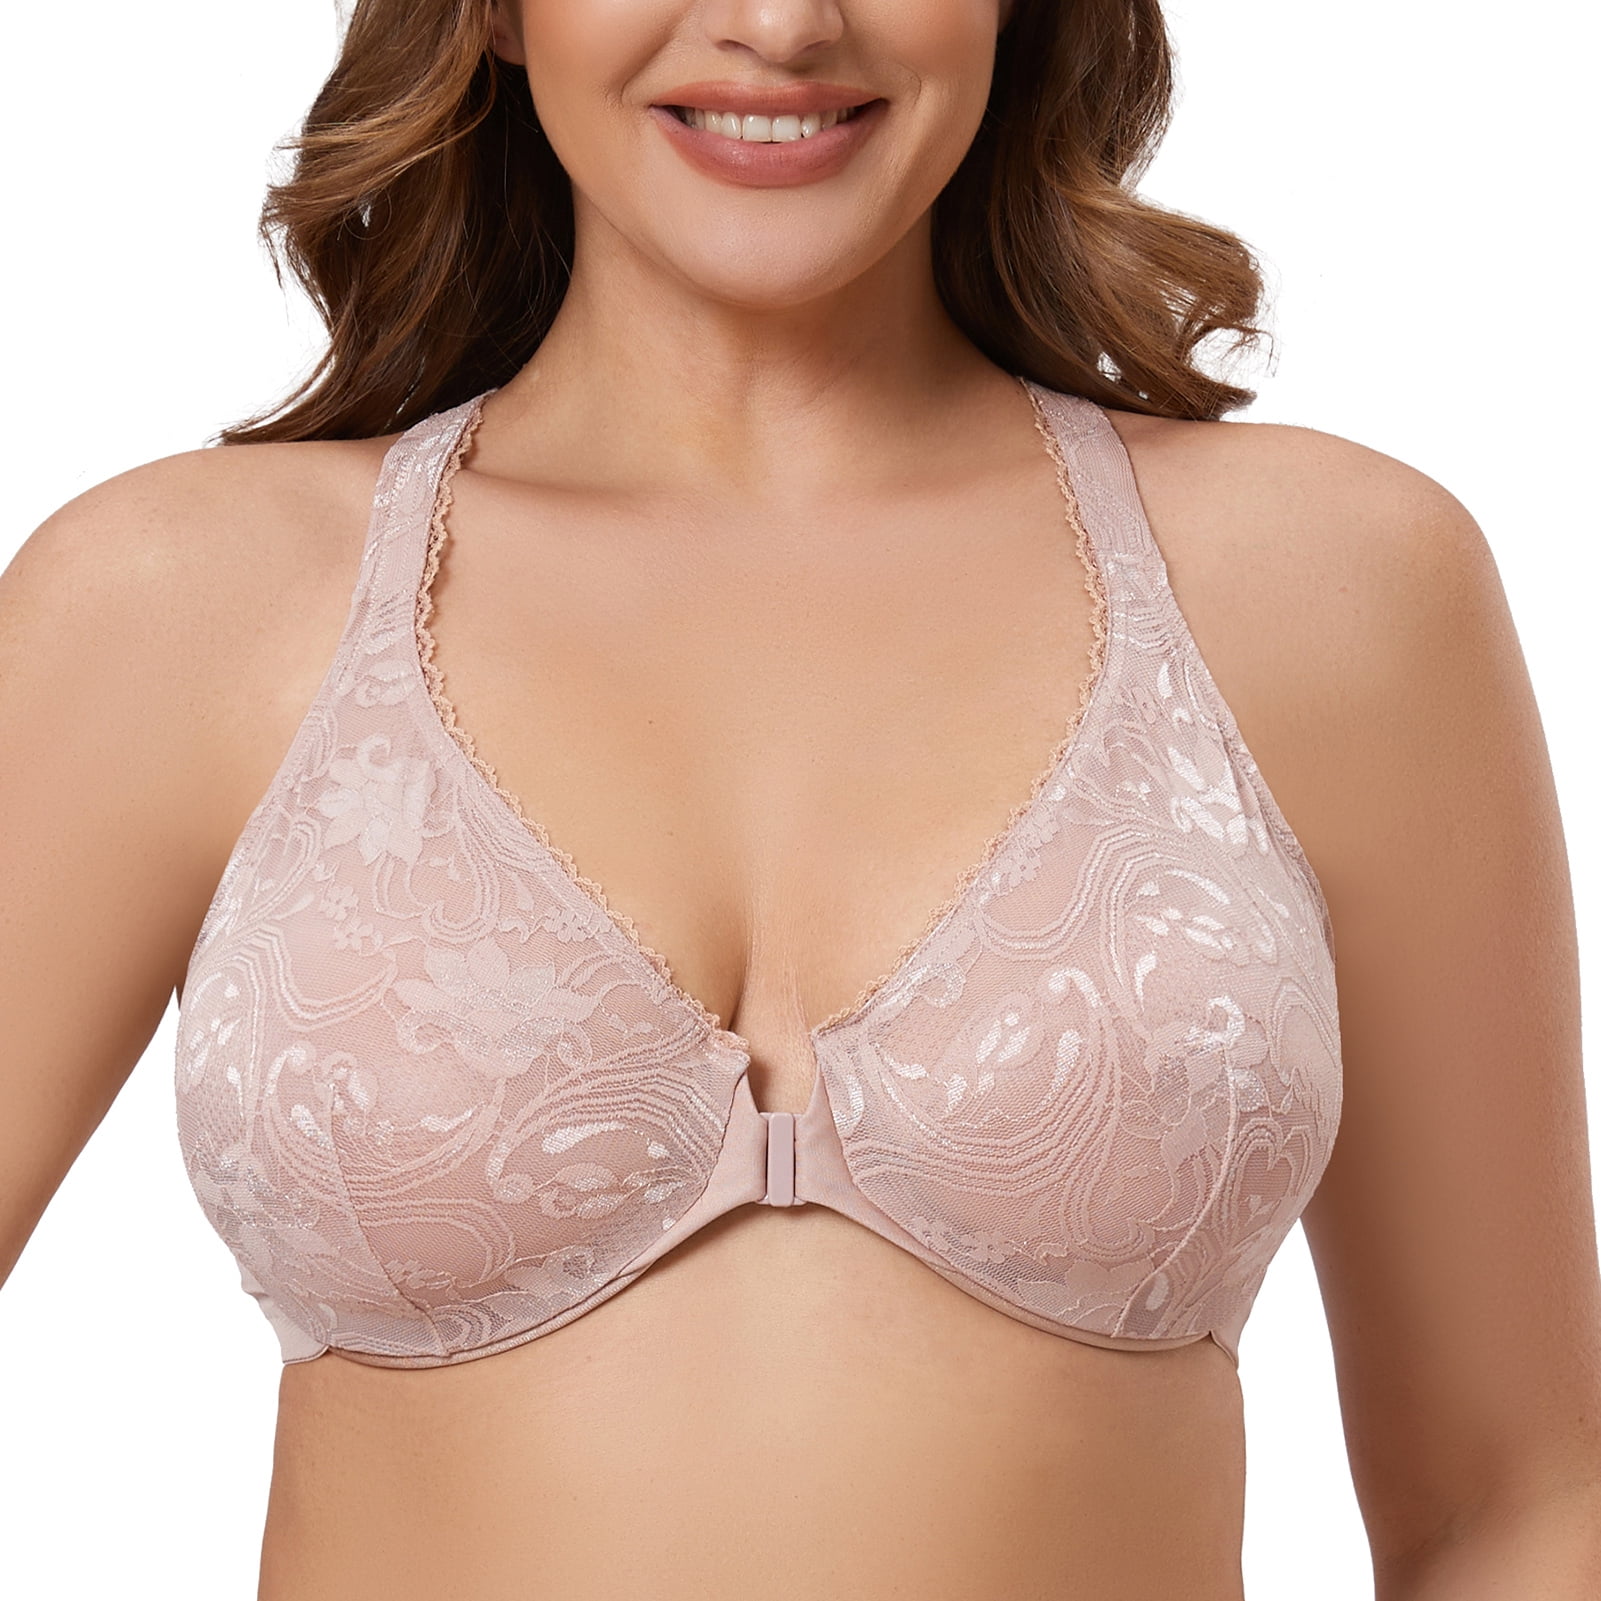 Breezies Seamless Long Line Wirefree Contour Bra with Lace Band